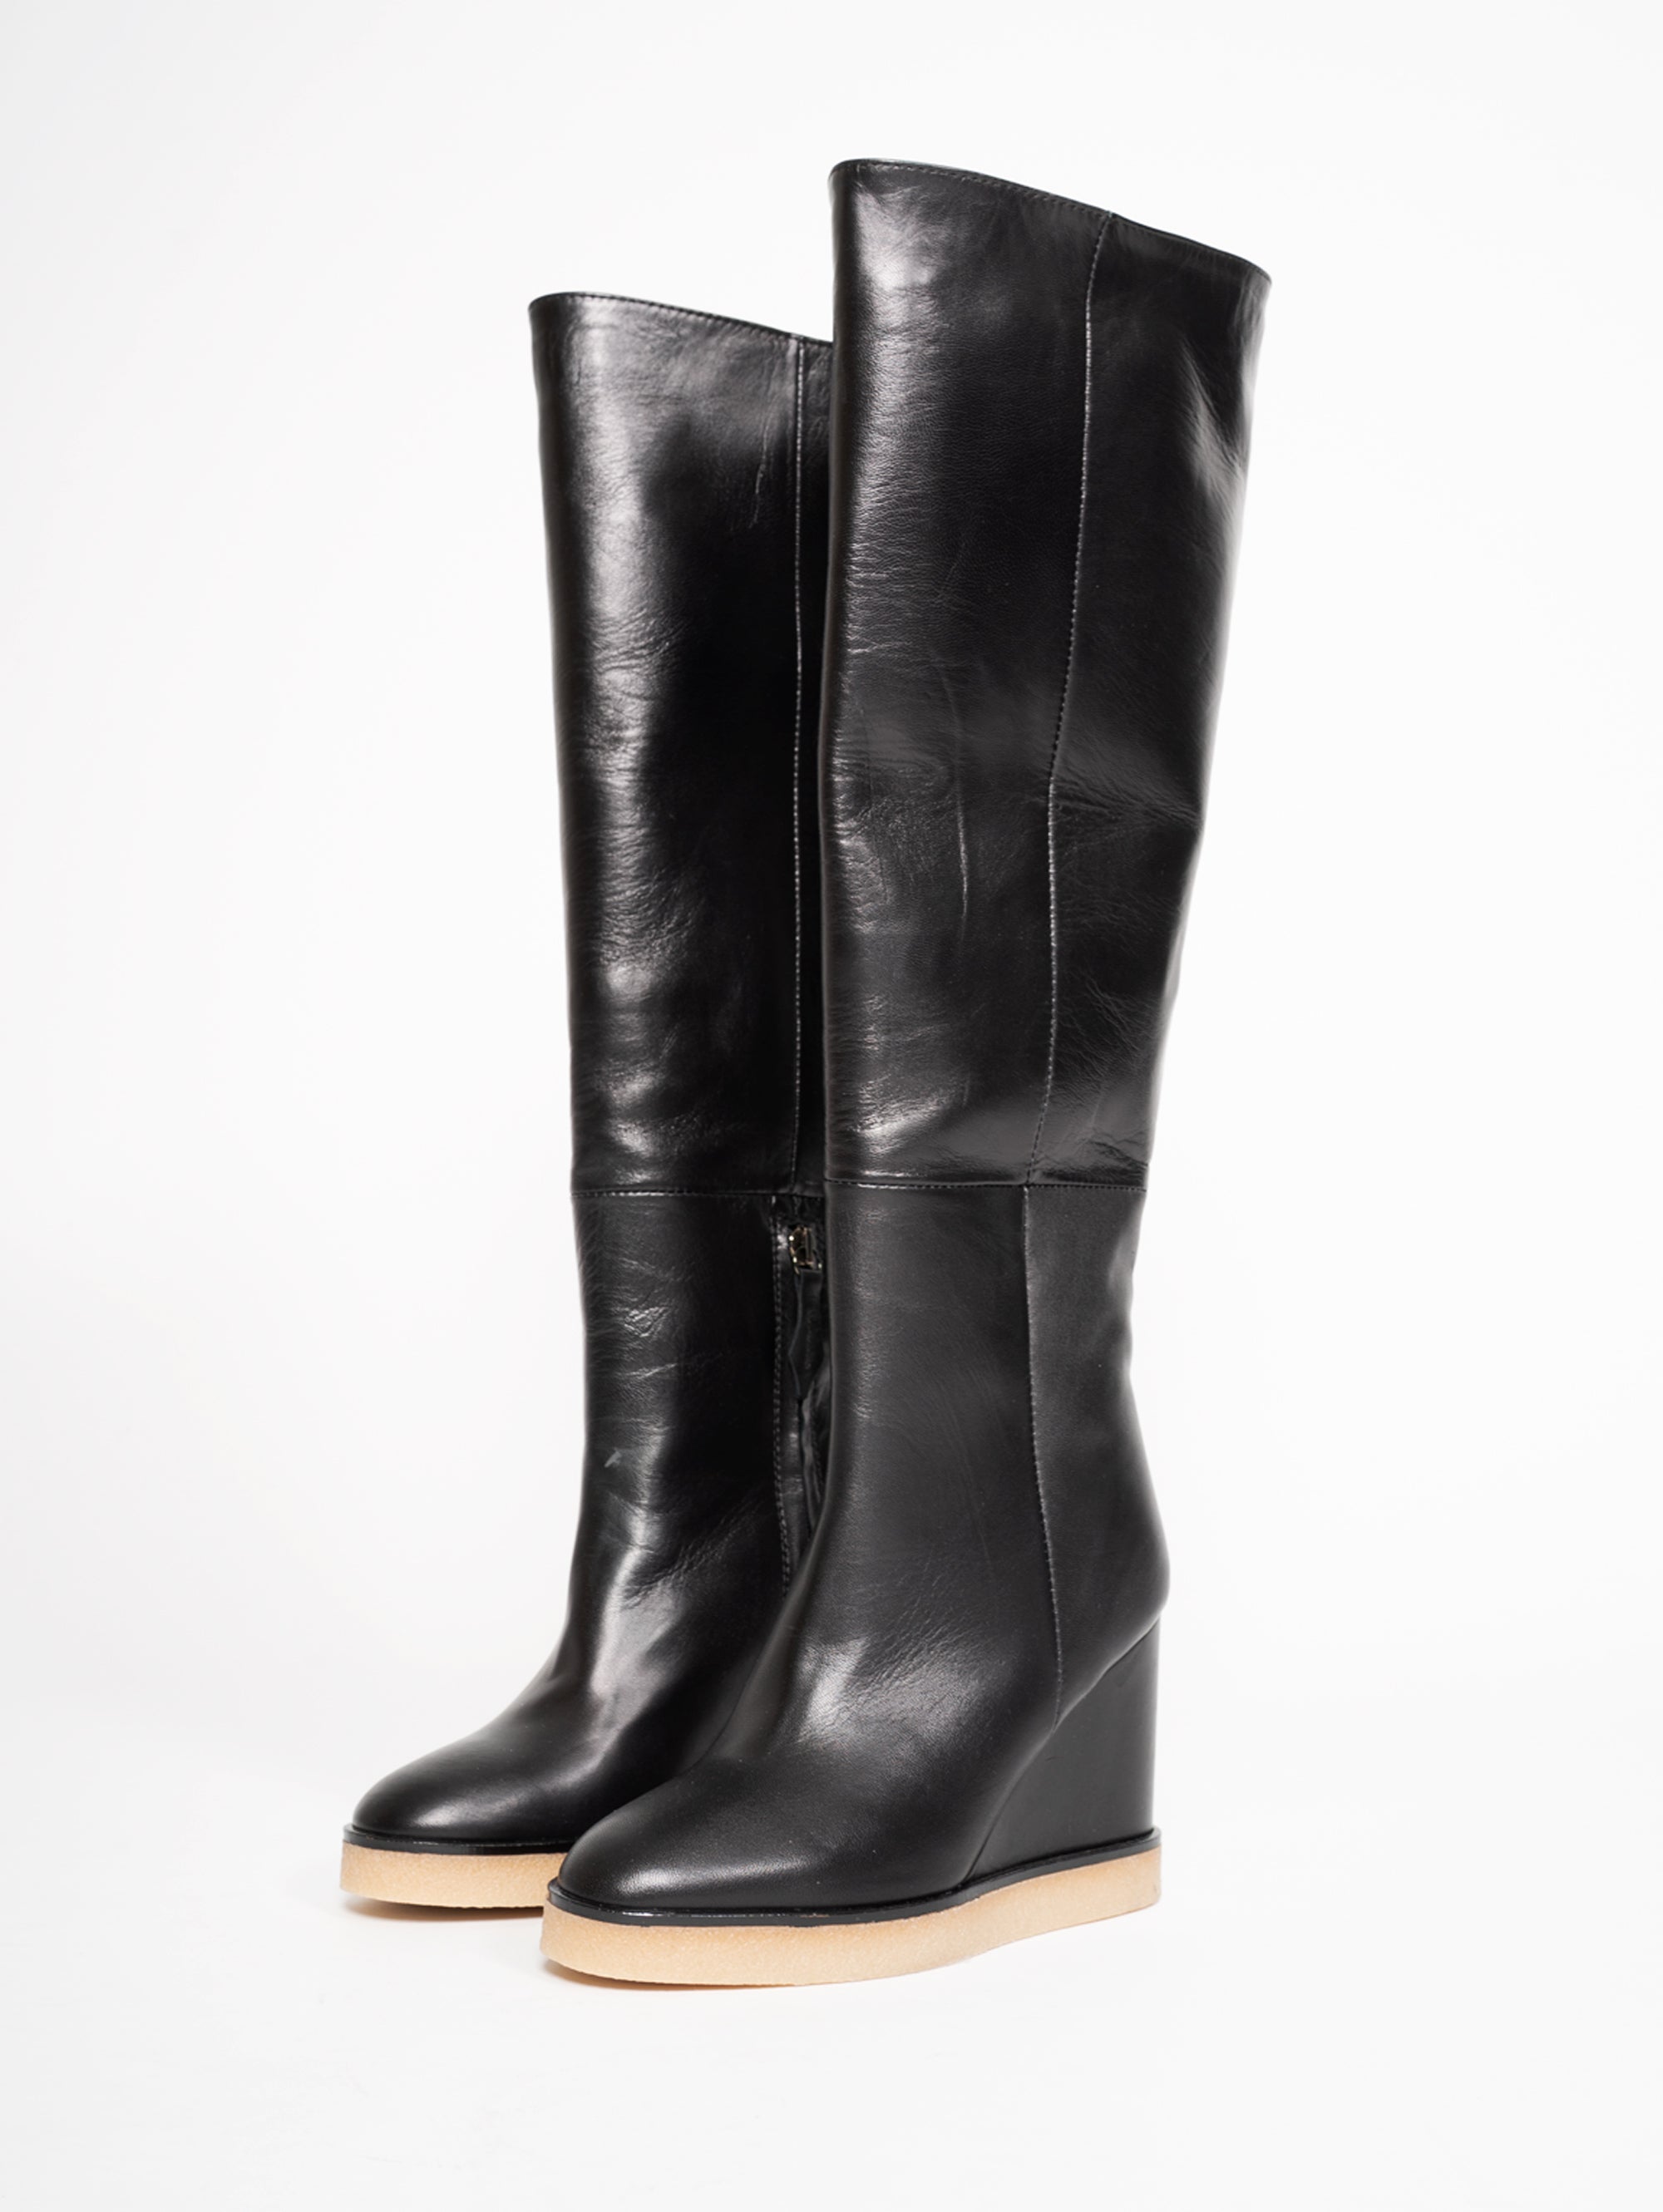 High Boots with Para and Black Wedge